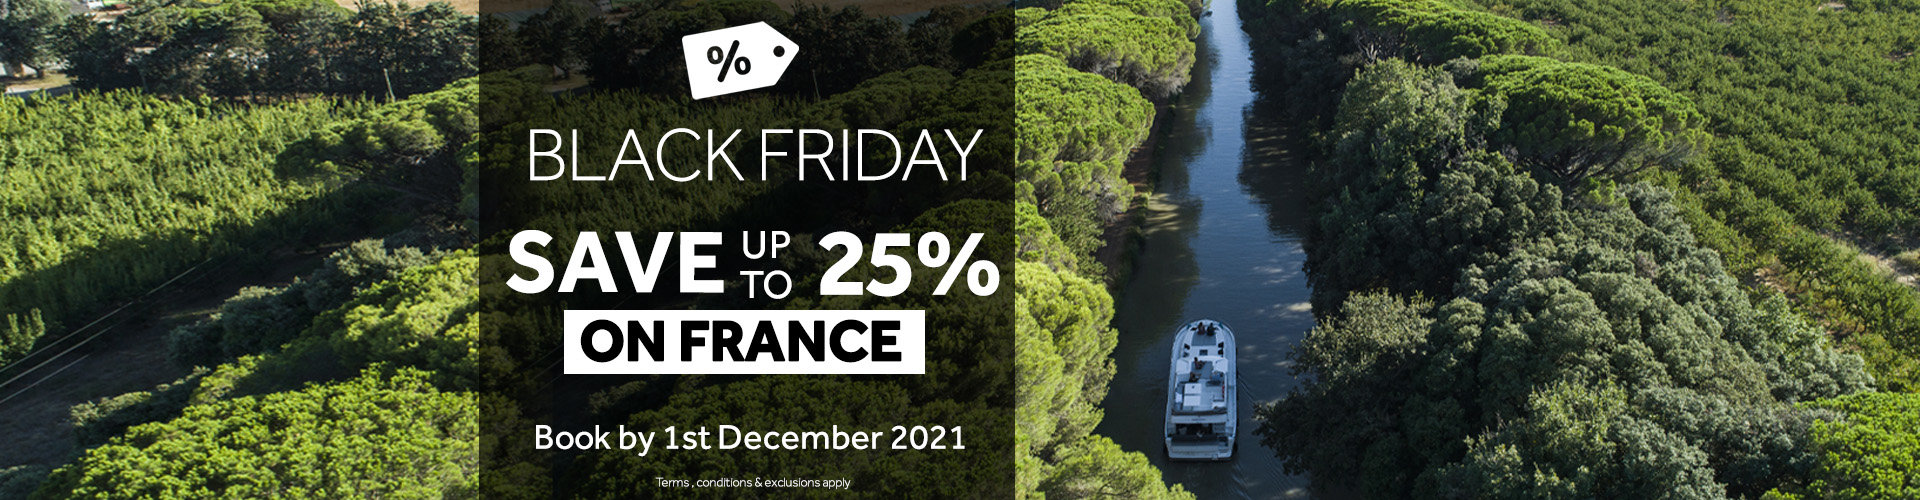 Black Friday Boating Offers